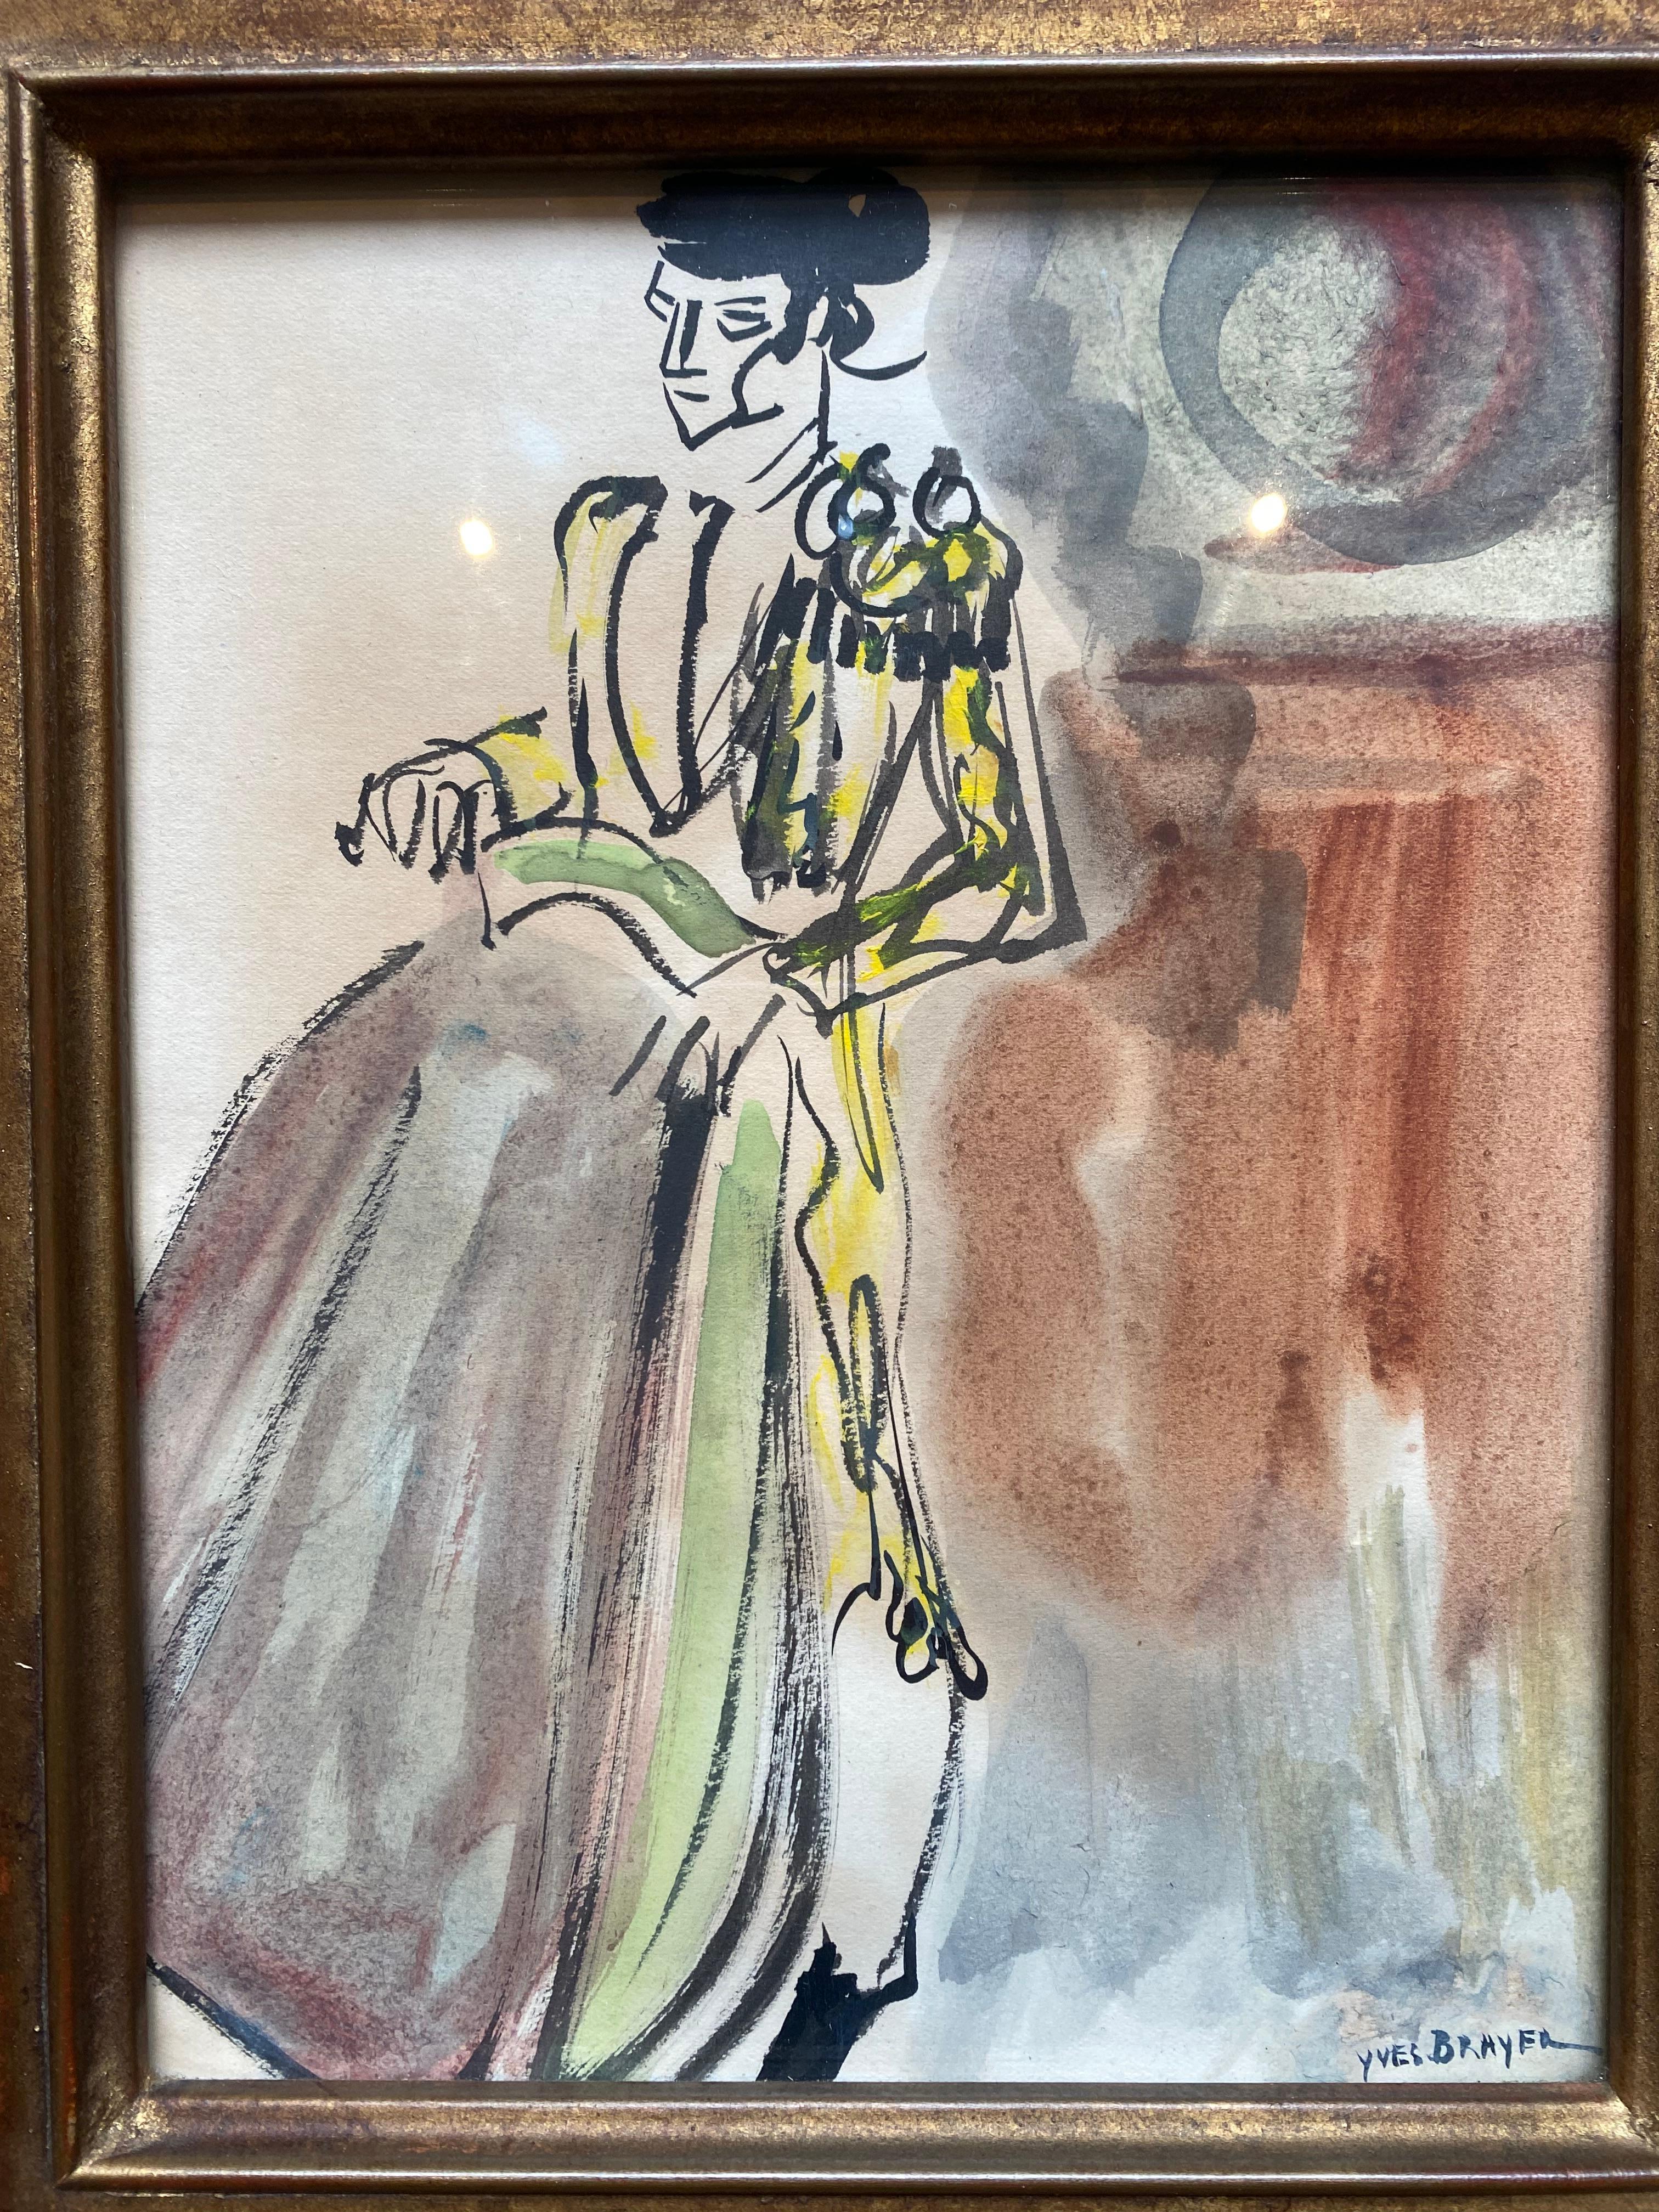 Very pretty watercolor by Yves Brayer, part of a series on the theme of my bullfighting. In a perfect state. Original frame.